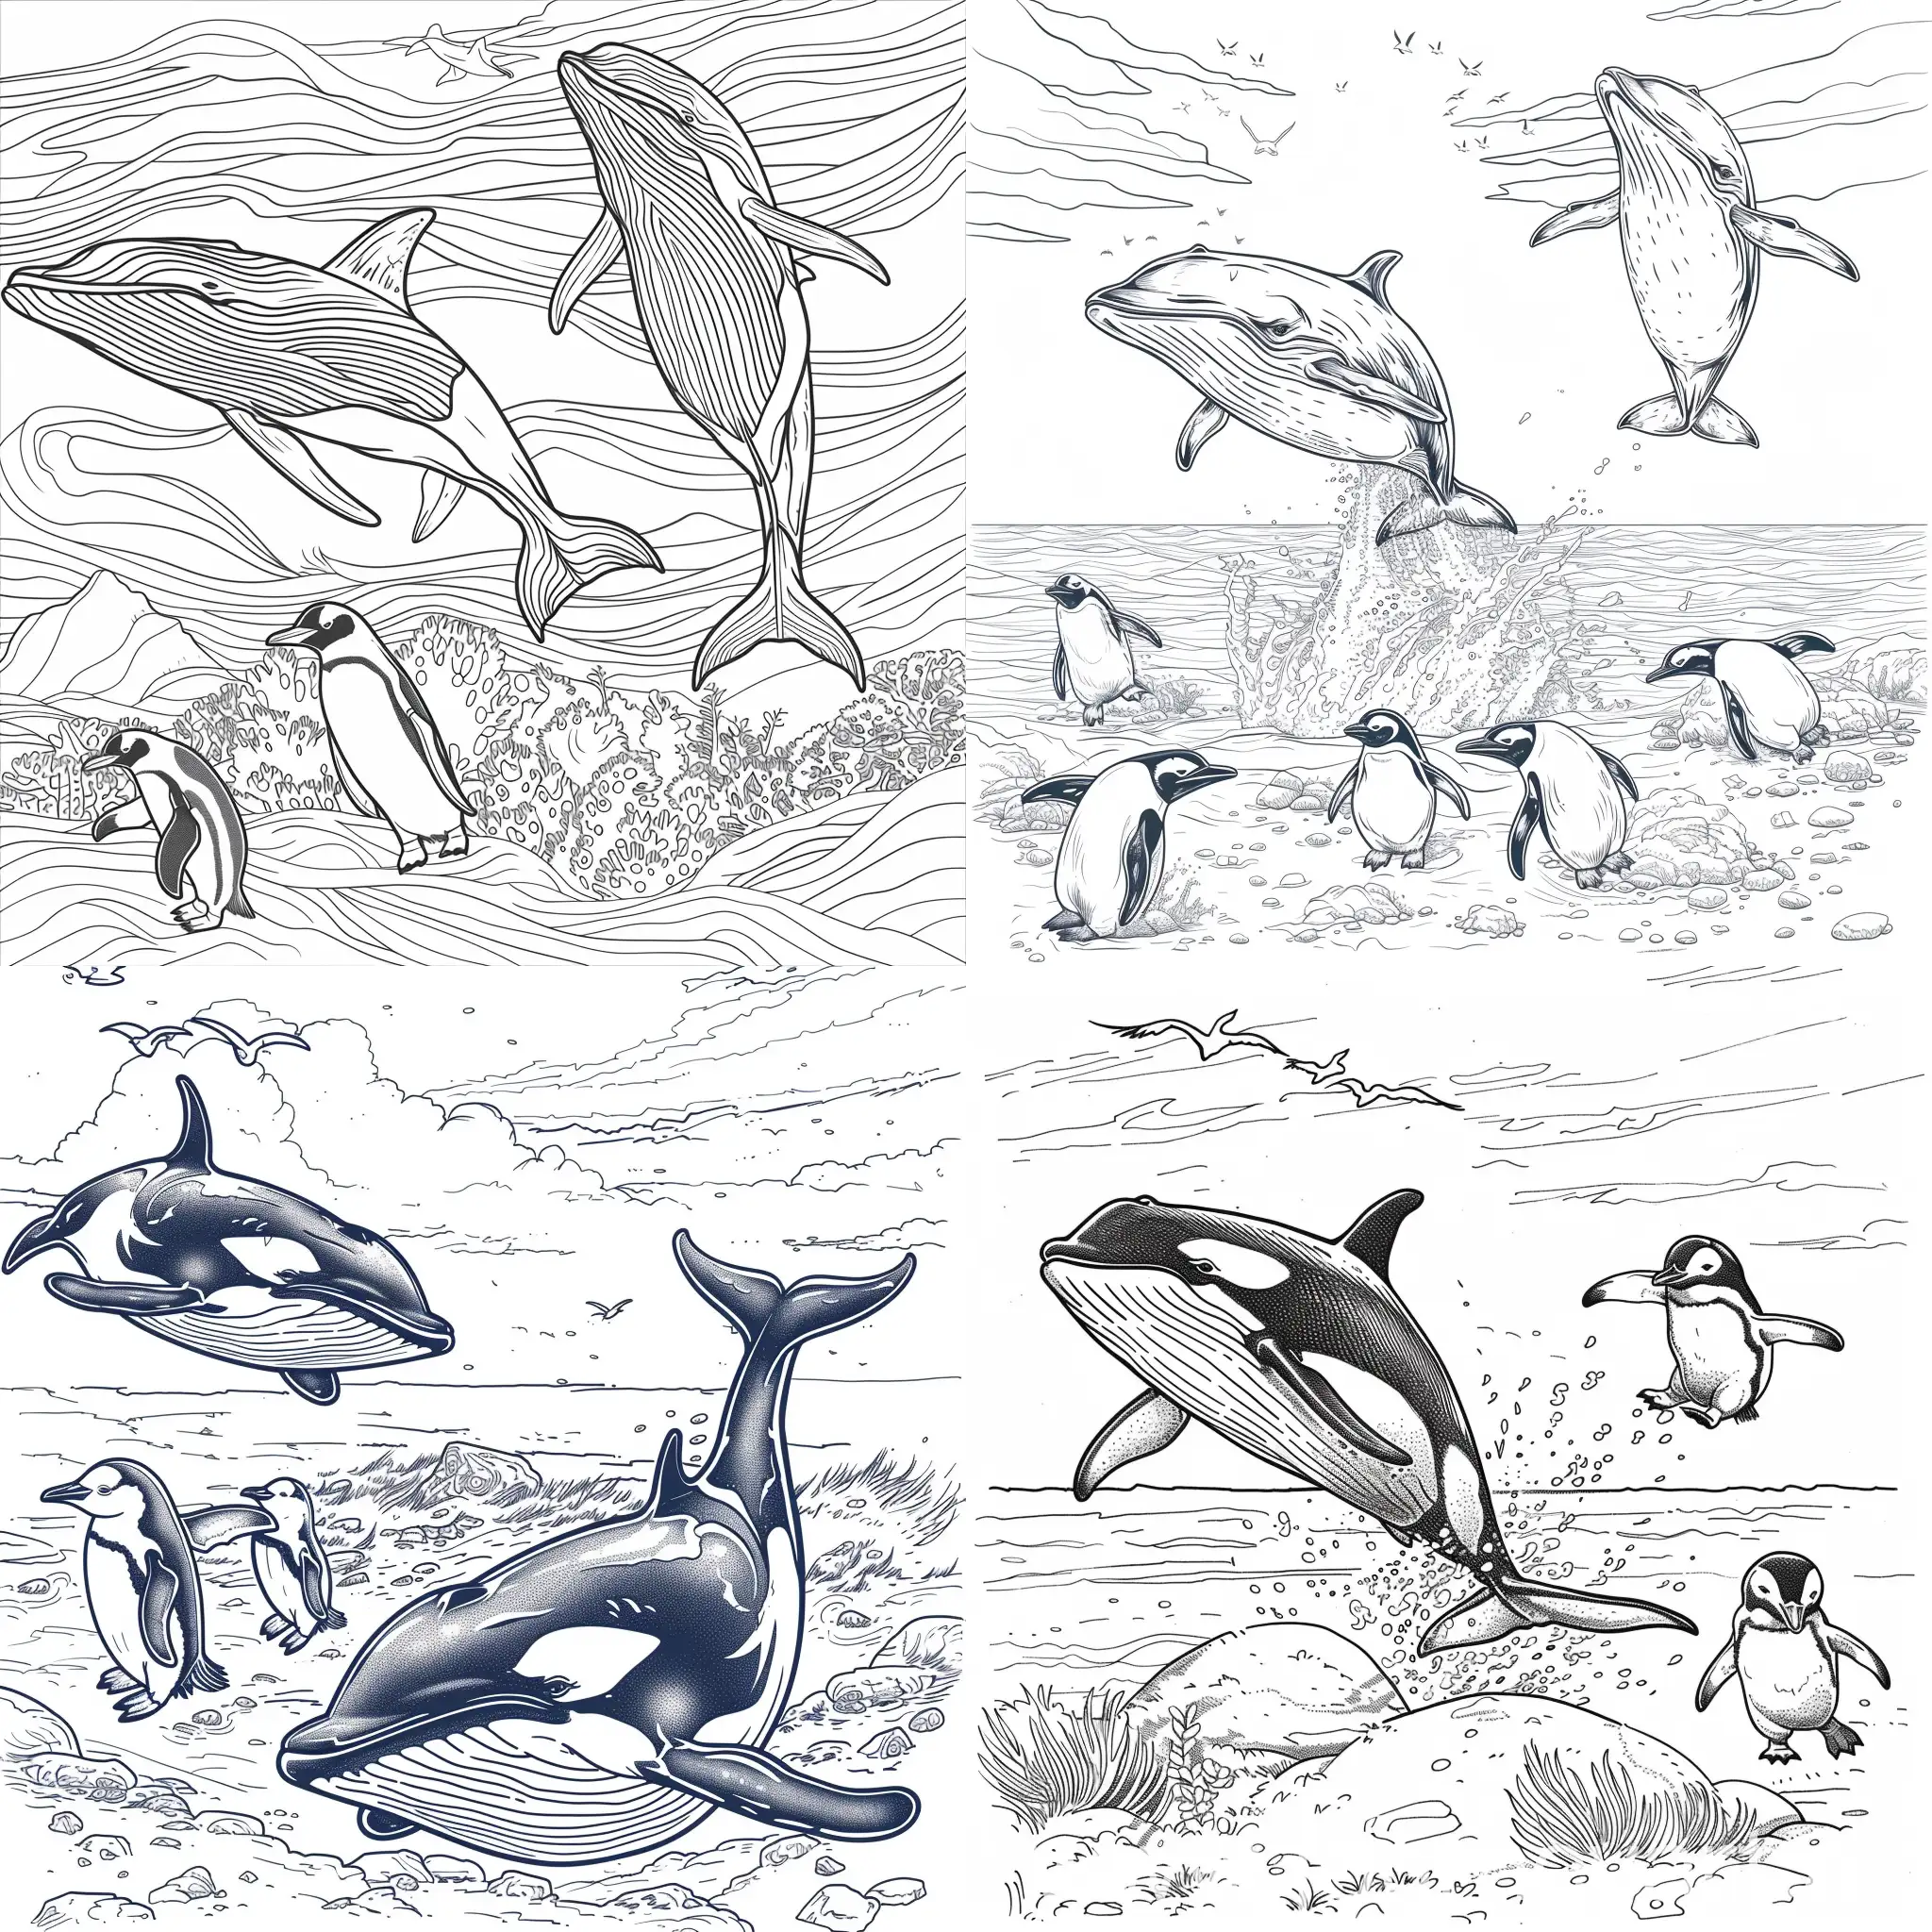 Playful-Killer-Whales-and-Penguins-Coloring-Page-for-Kids